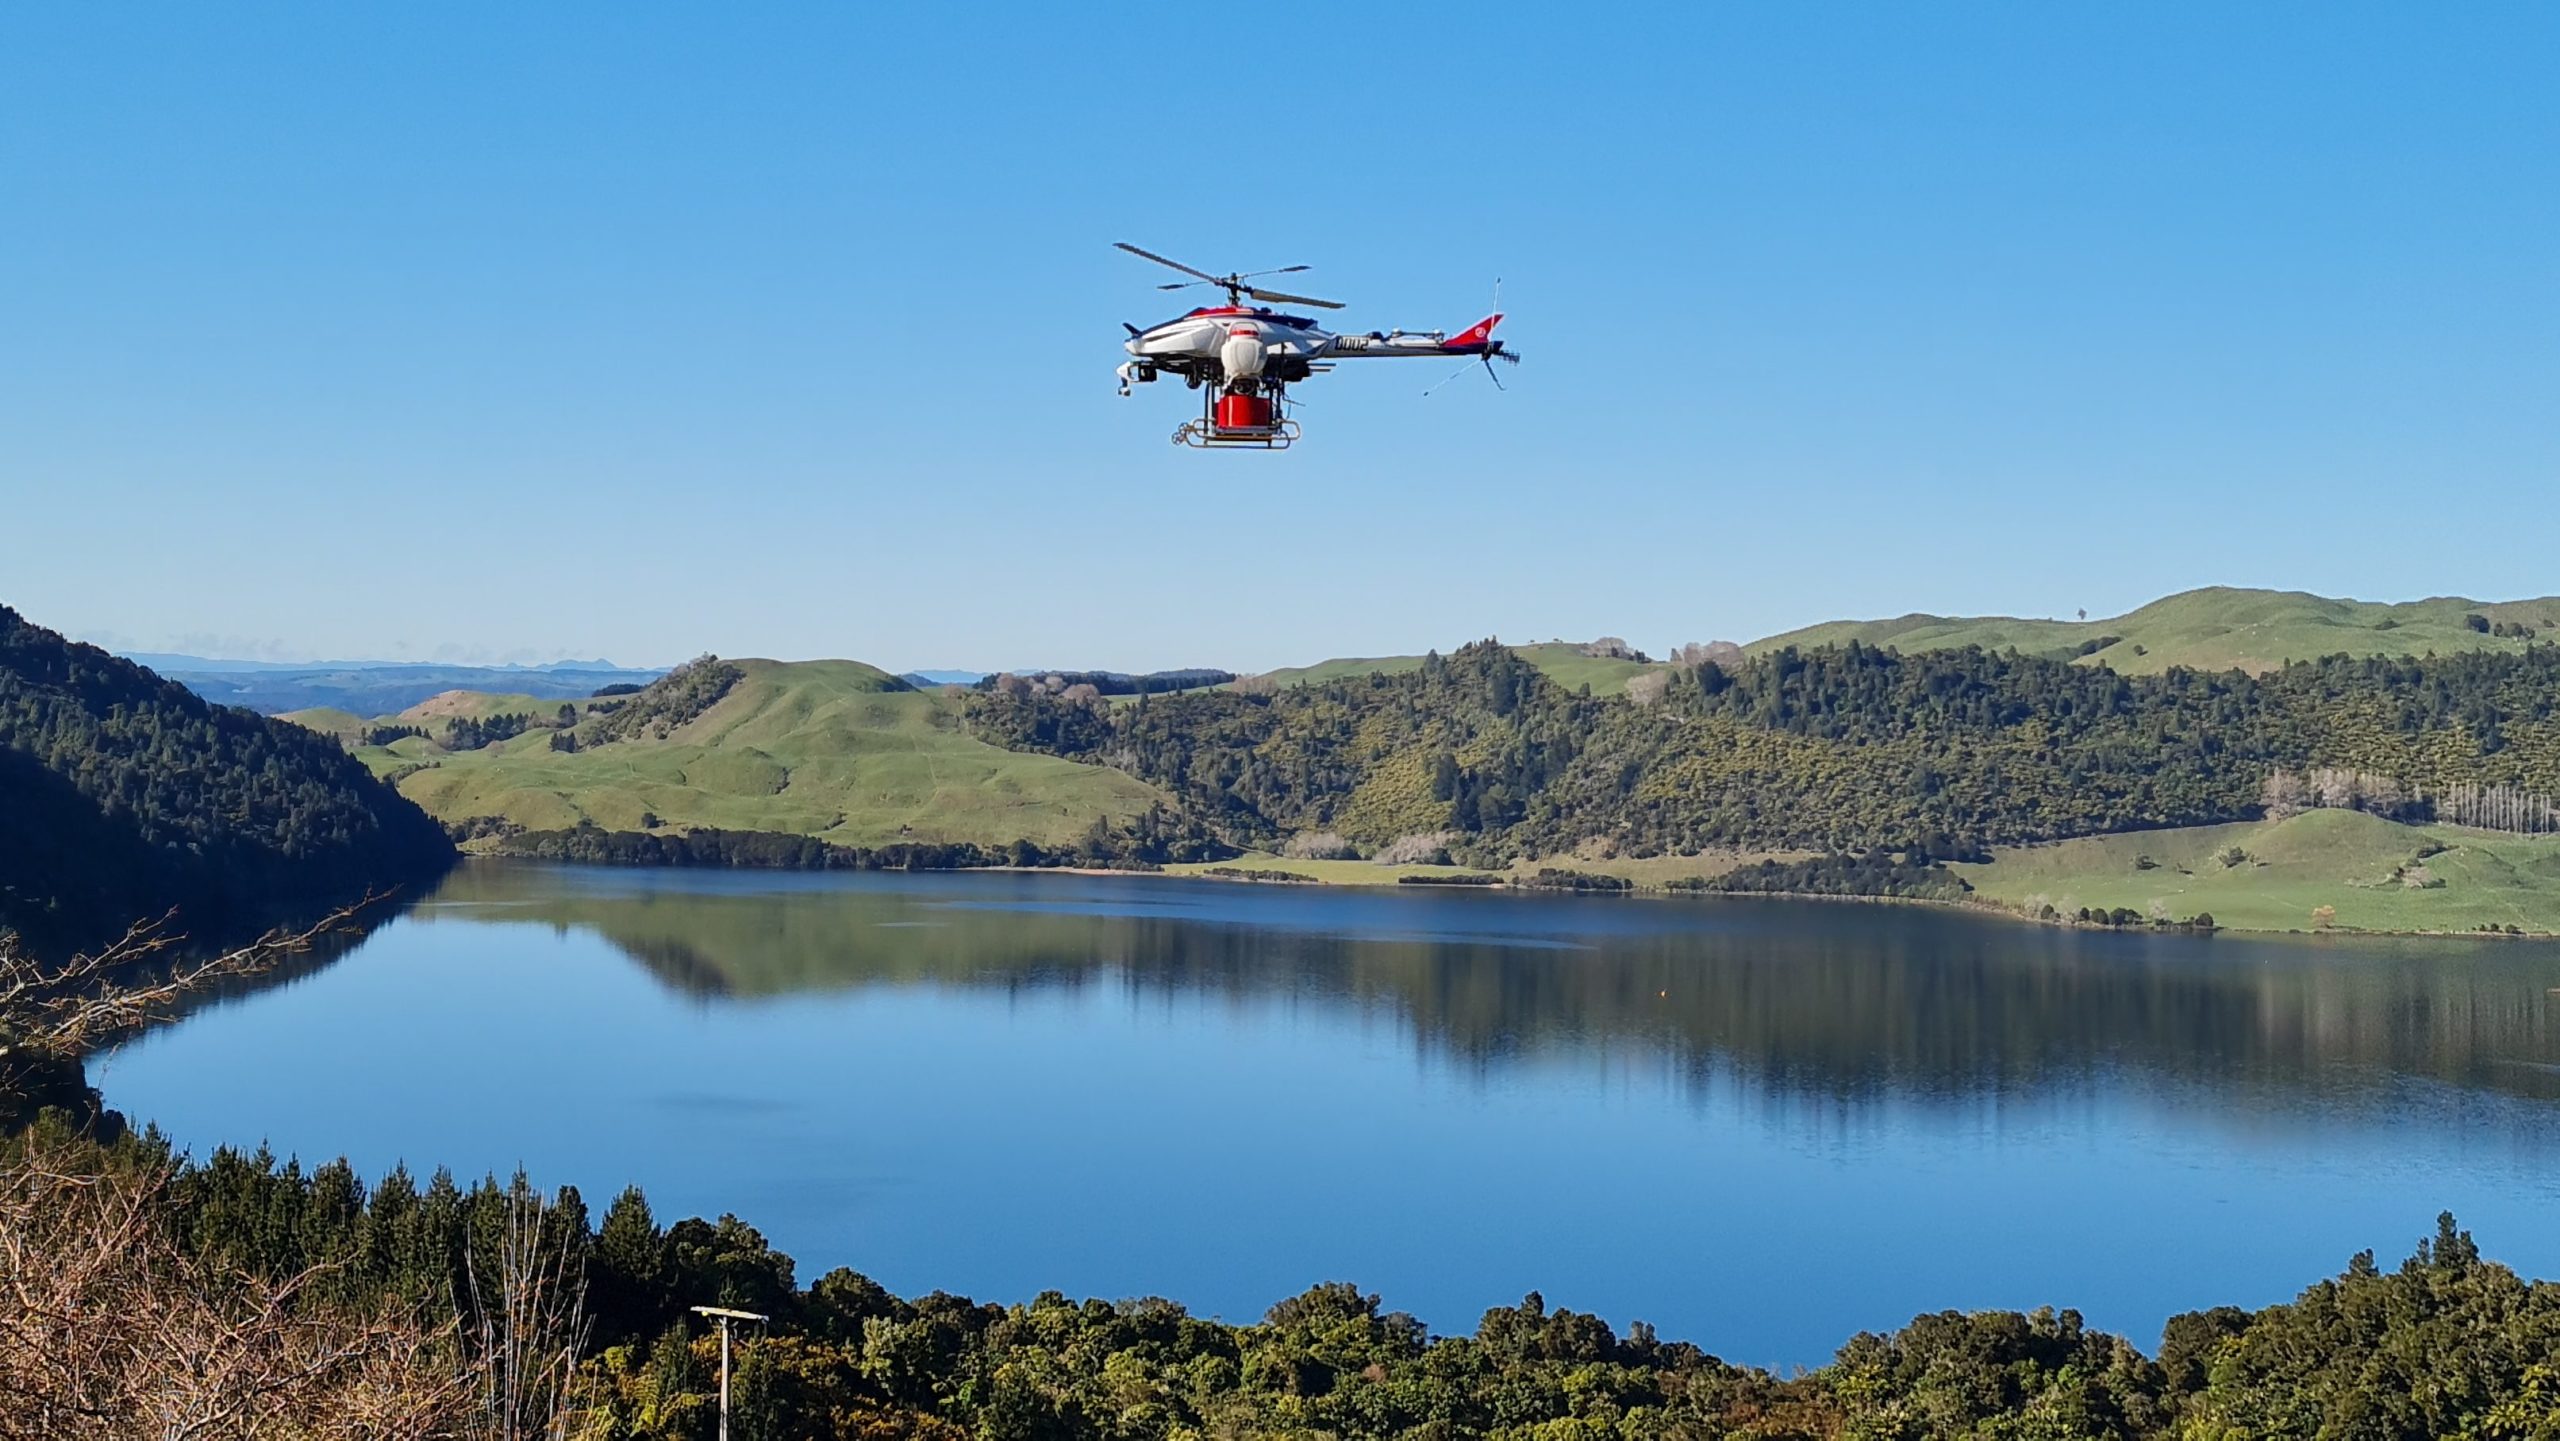 A drone in flight over a body of water.